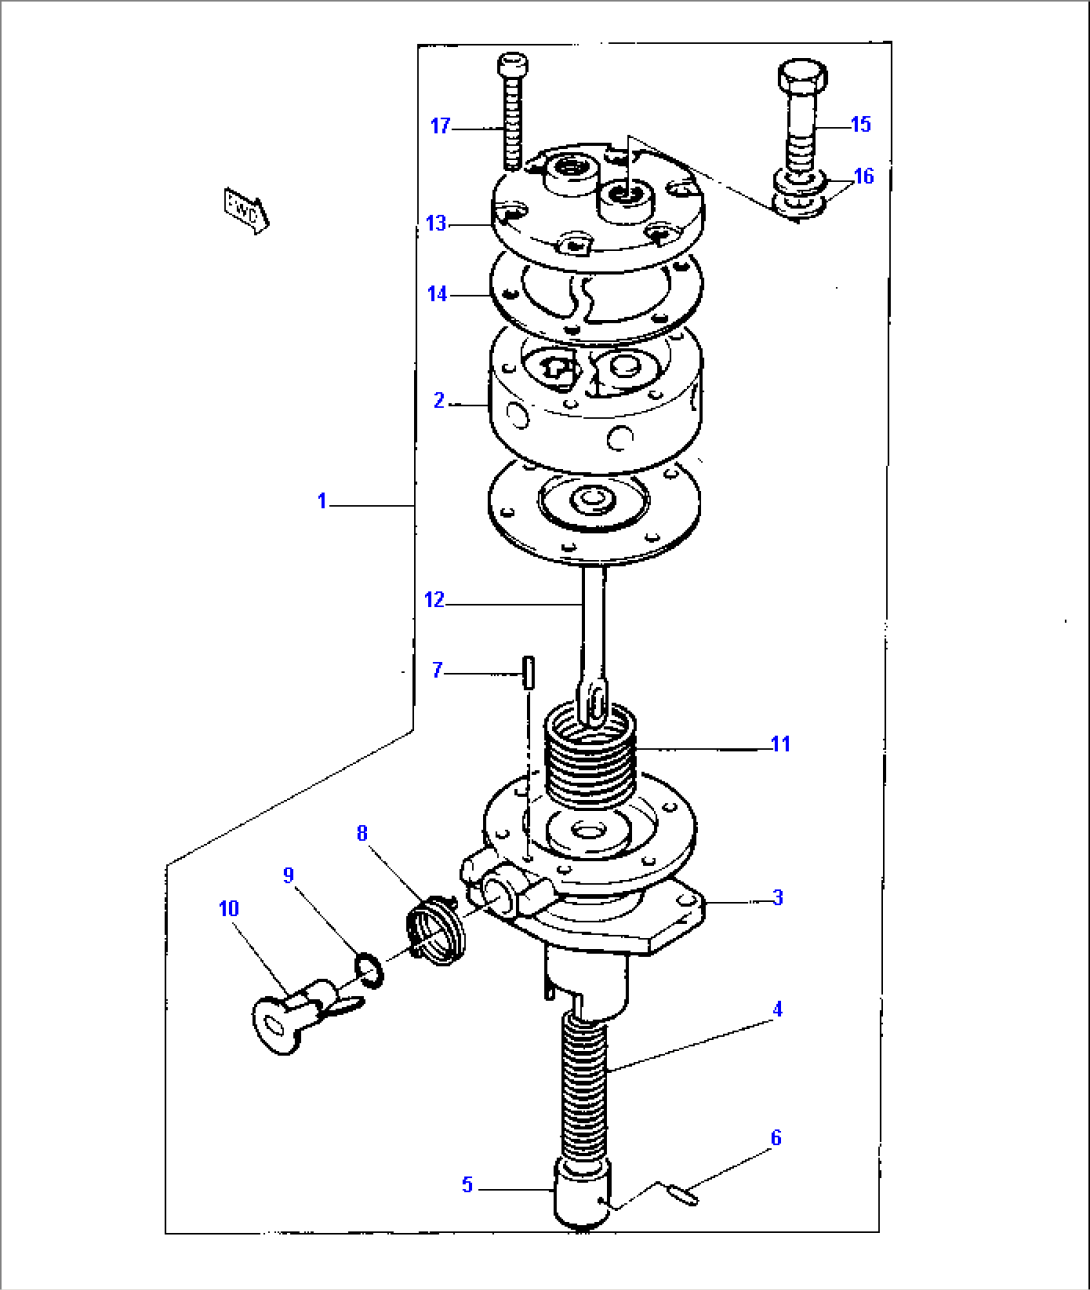 LOW PRESSURE FUEL SYSTEM (2nd PART)